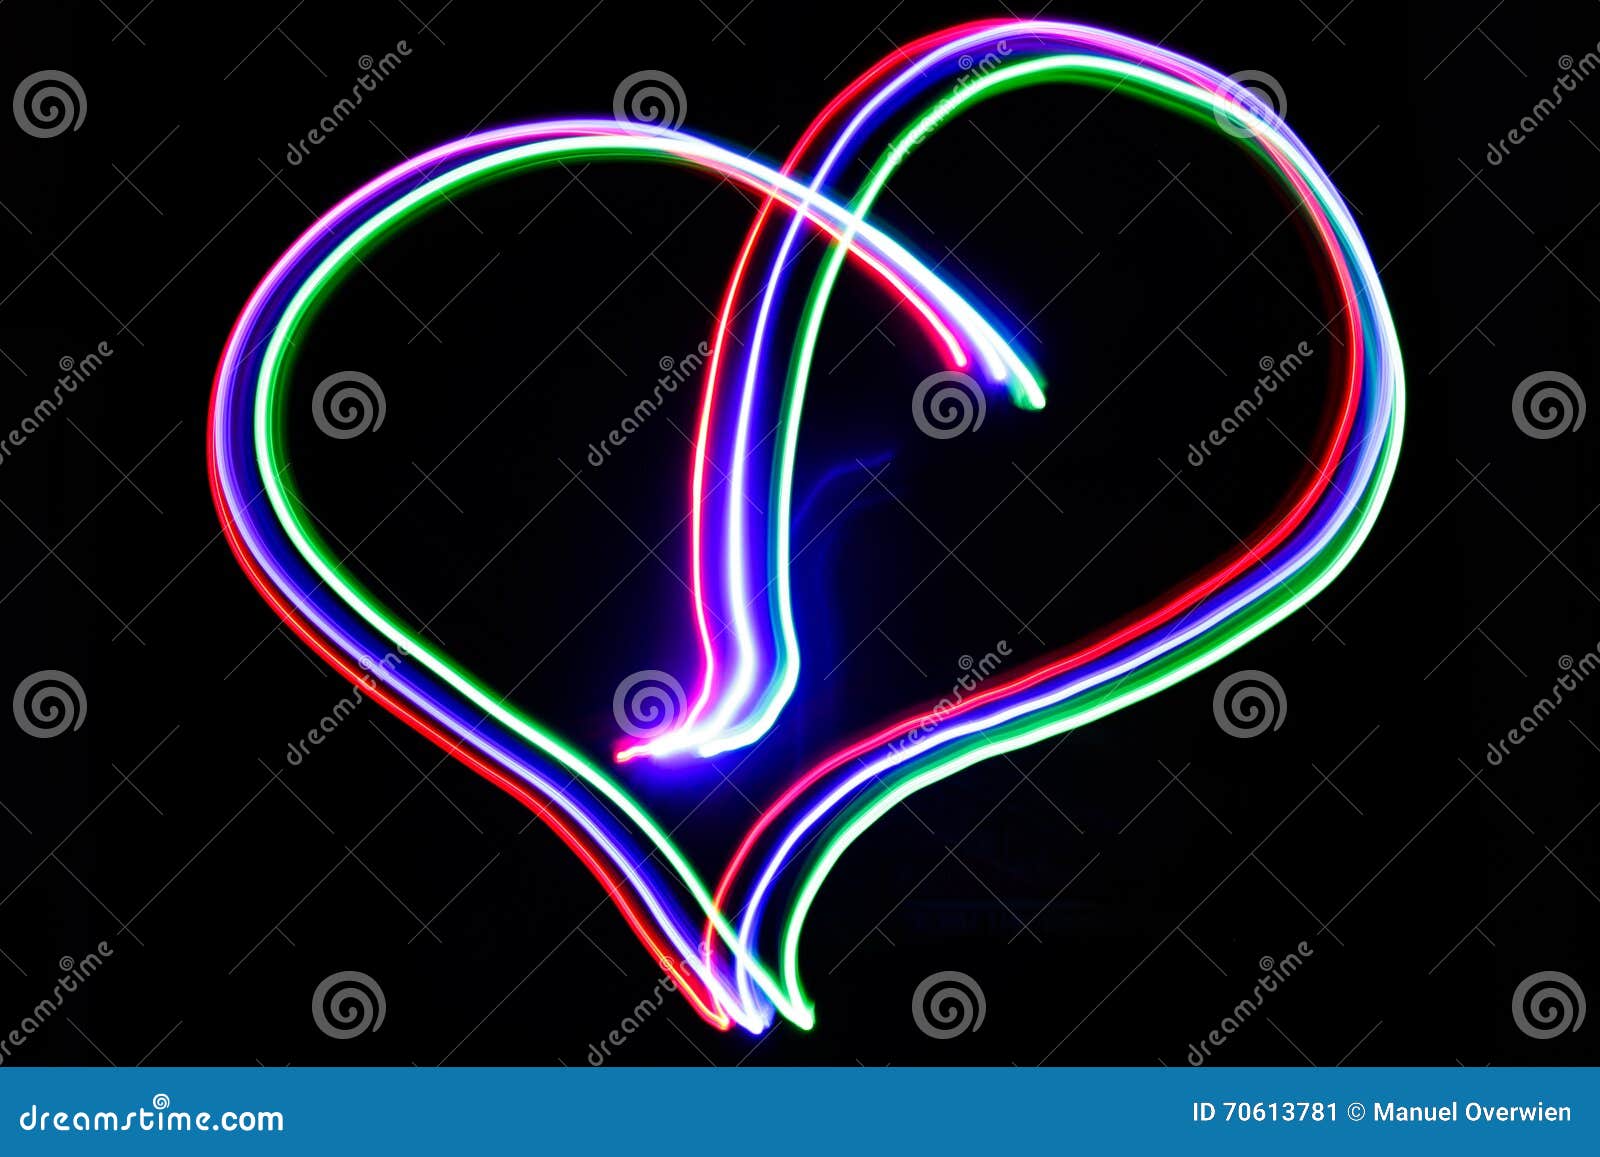 Lightning Heart Neon Generated With Colored Lights And A